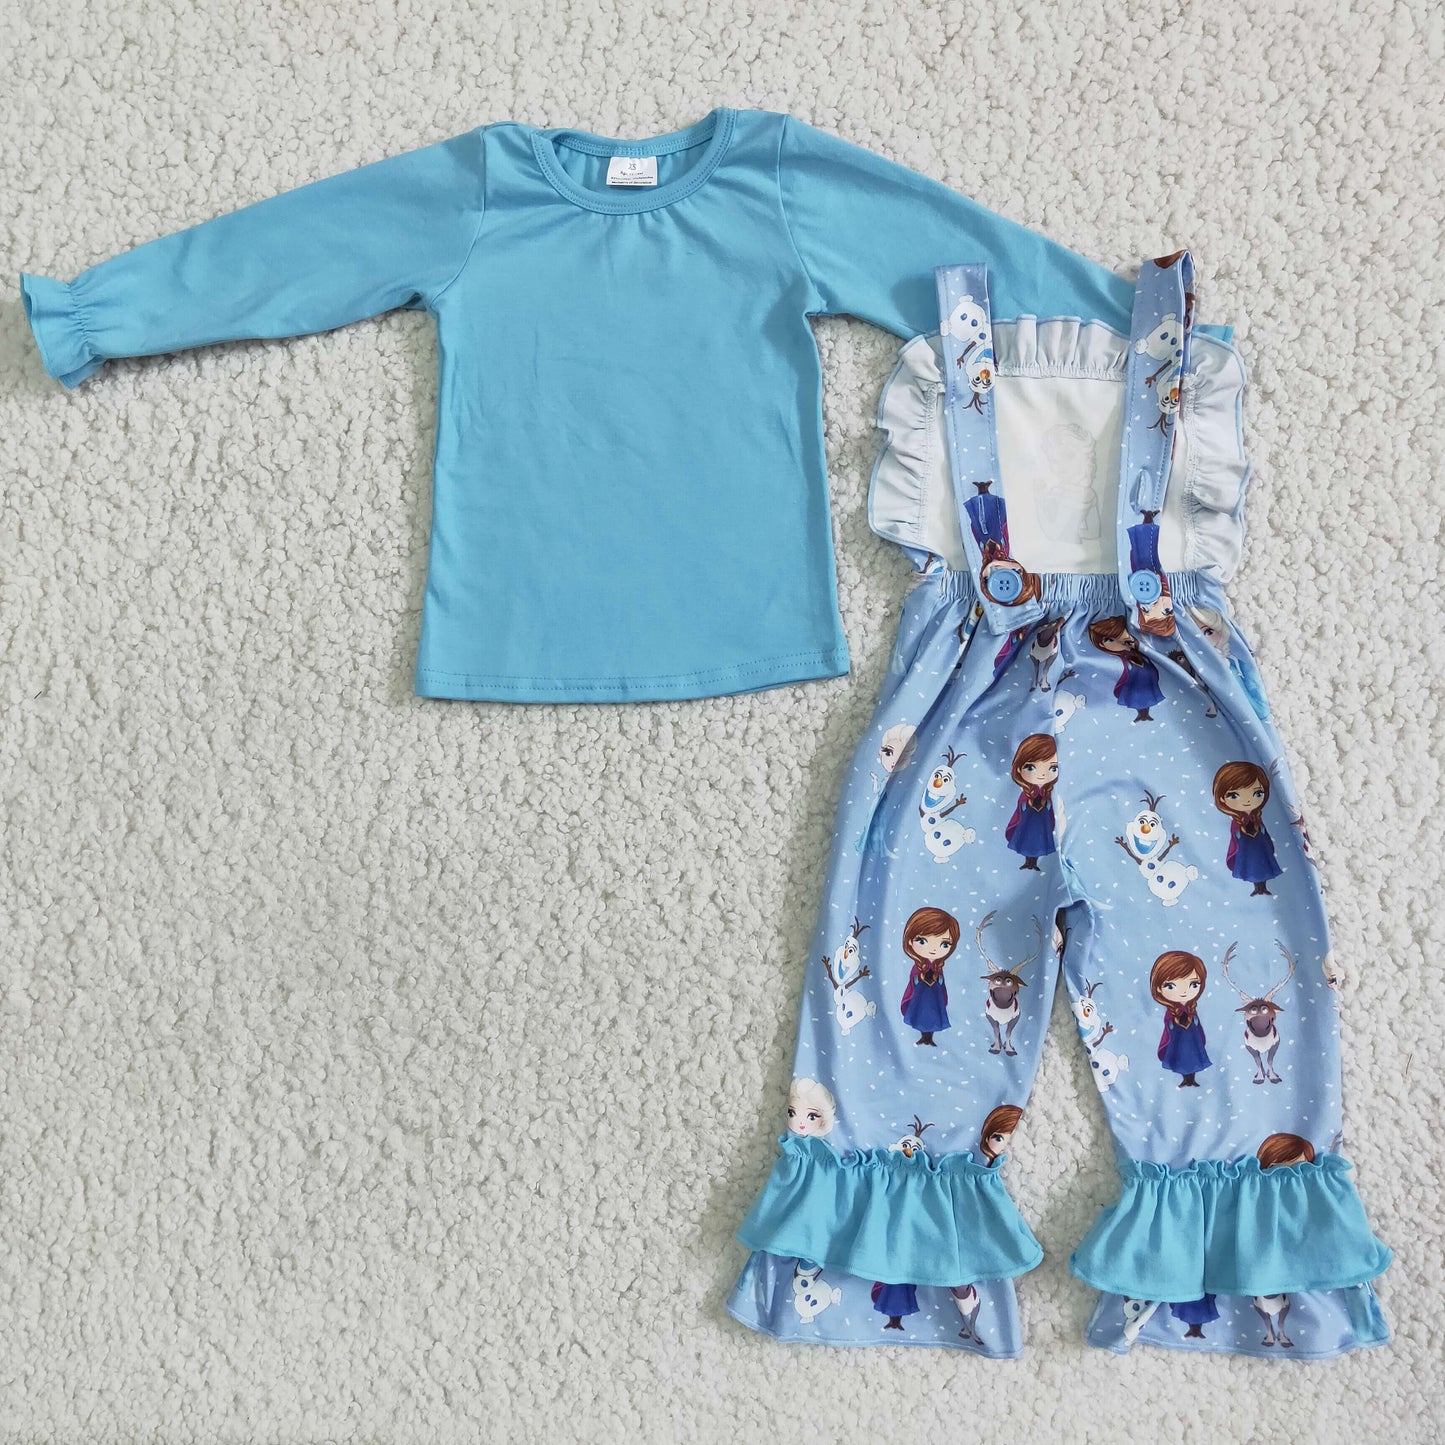 6 A17-28 blue top princess overalls girls outfits